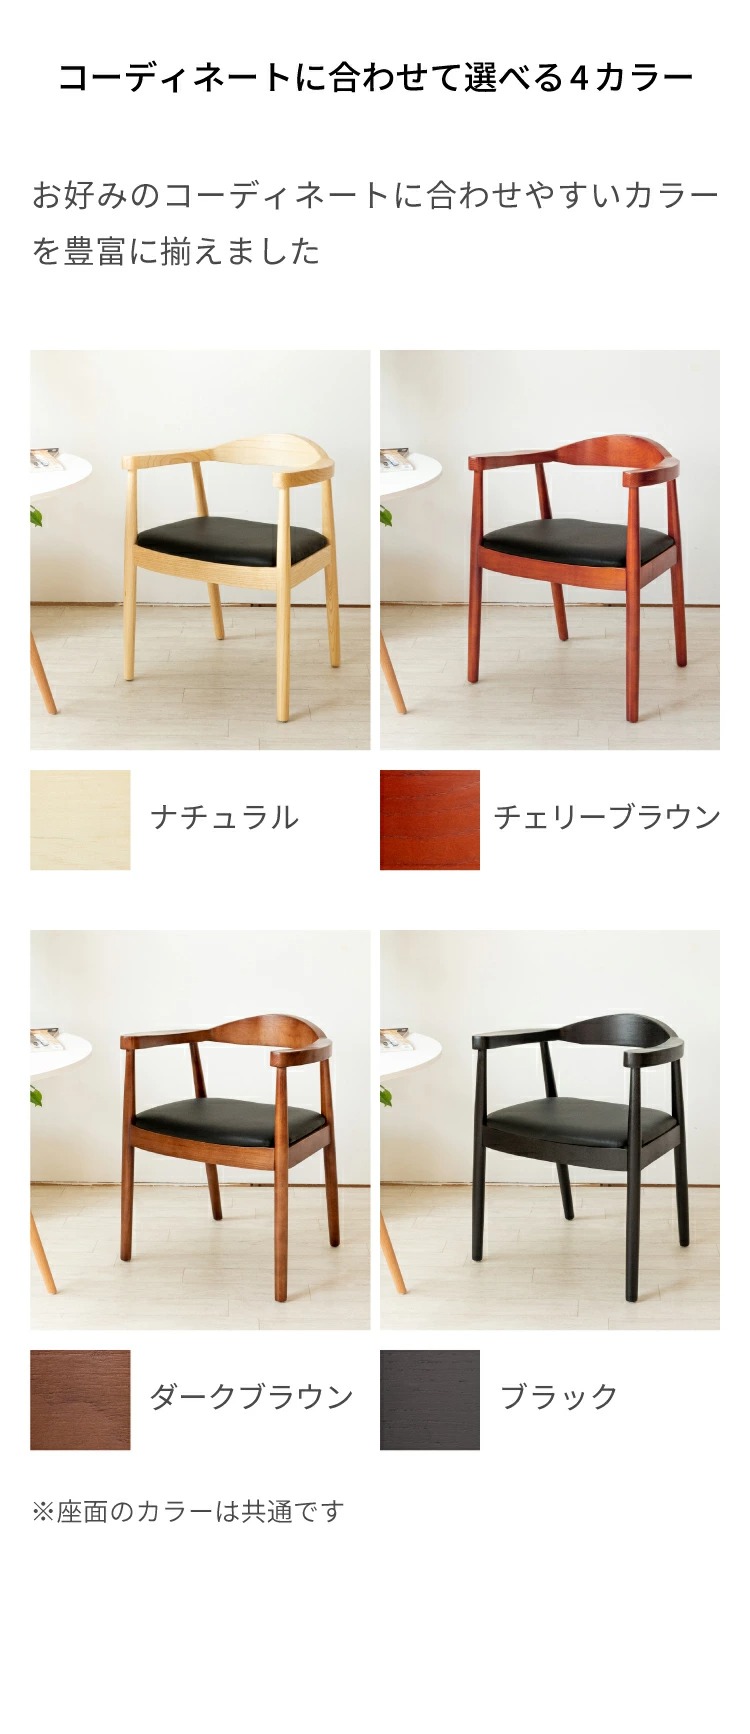 Supreme - 即納 送料無料 Director's Chair red 赤 椅子 イスの+pcinbox.cl